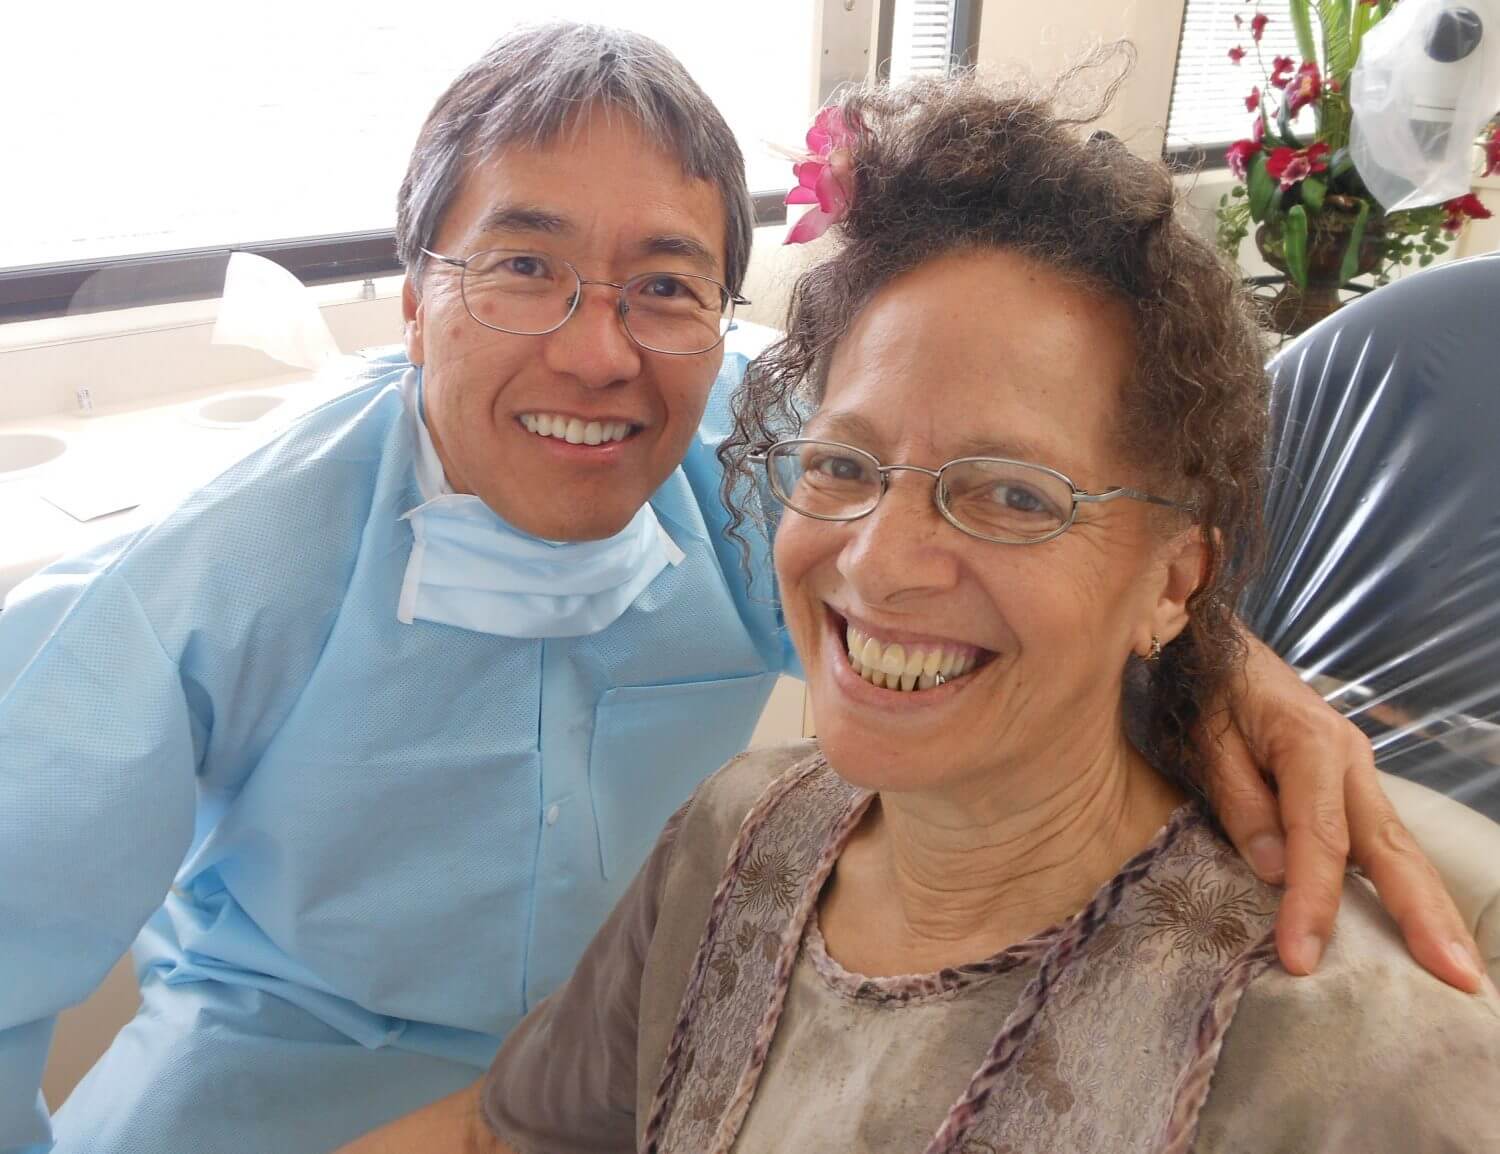 Lifeline in Action – Hawaii Patient Gets a New Smile!